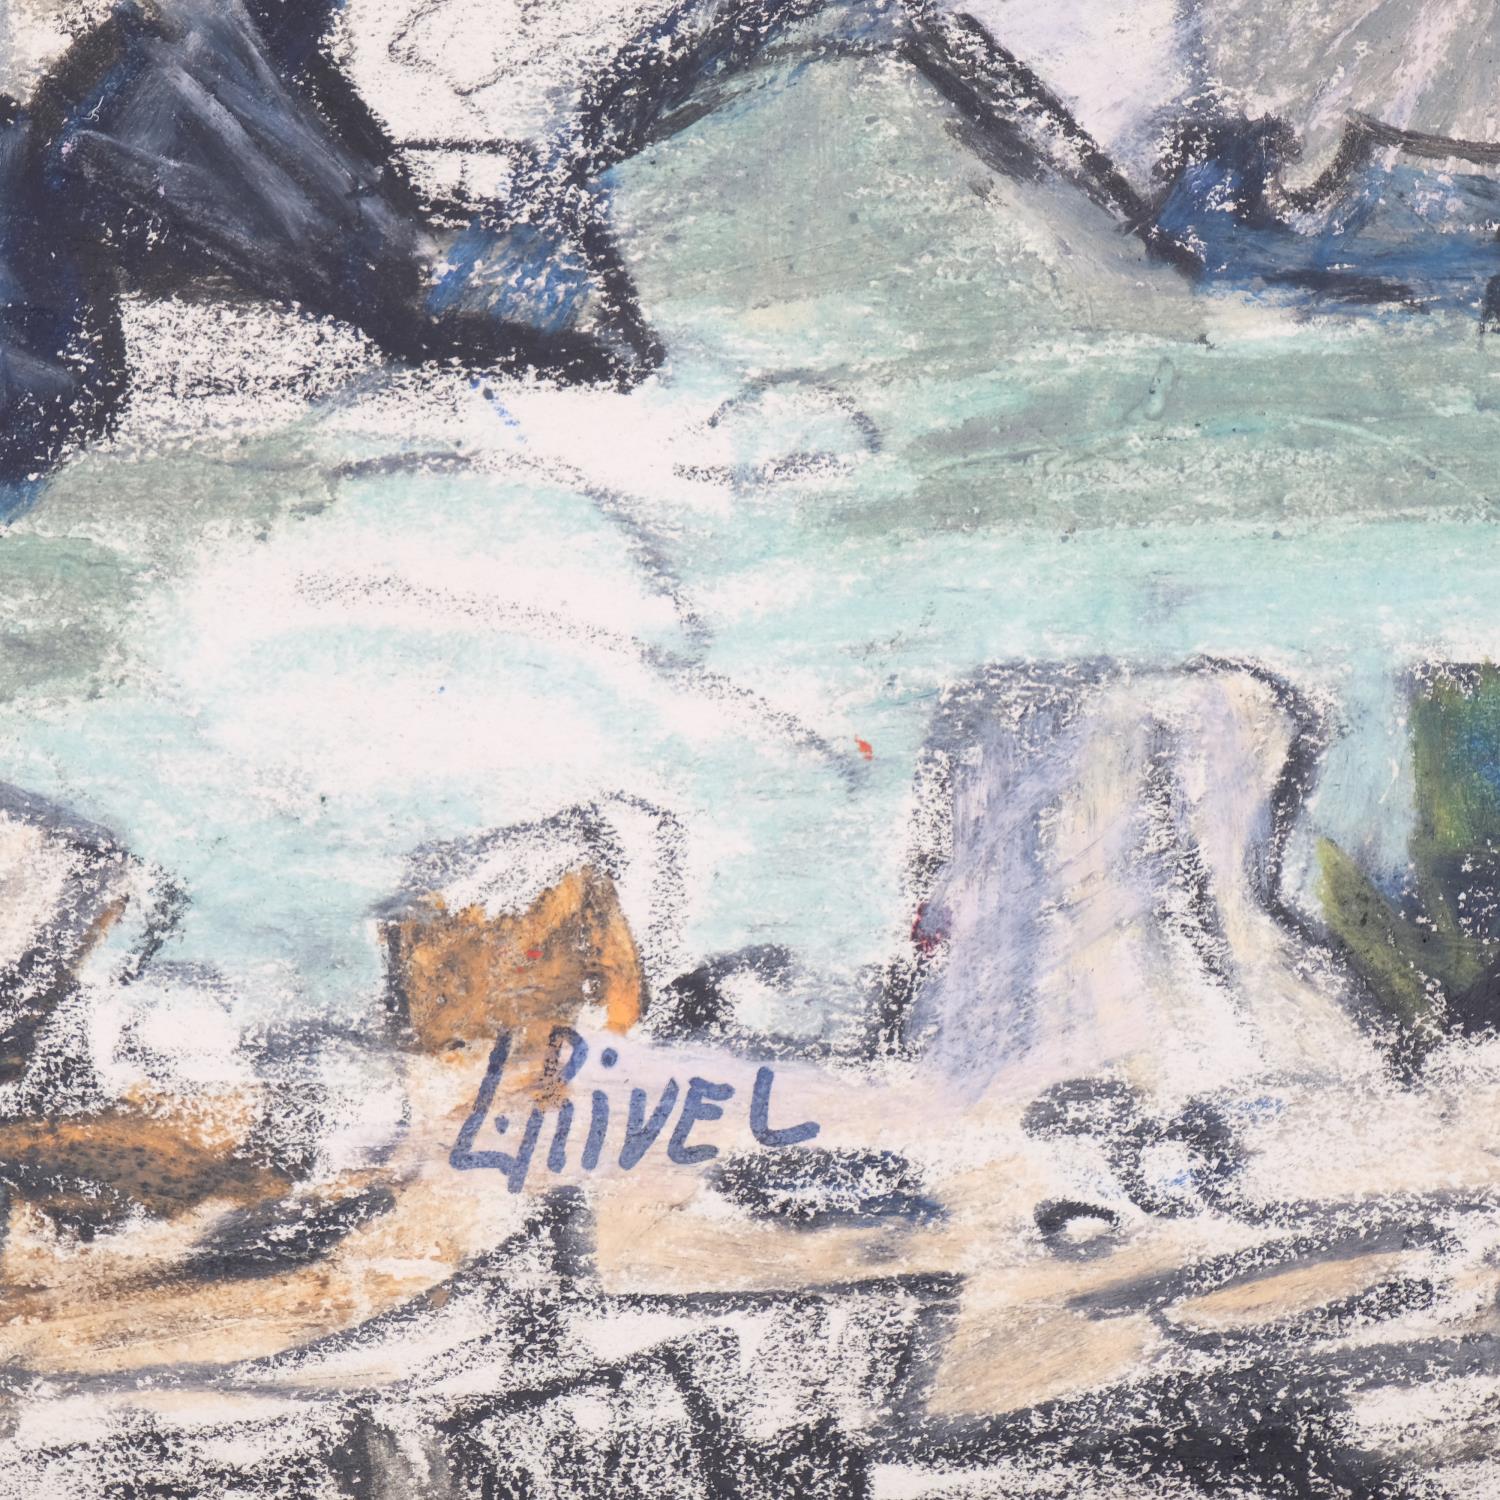 Lucie Rivel (1910 - 1991), abstract composition, mixed media on paper, signed, 22cm x 27cm, unframed - Image 3 of 4